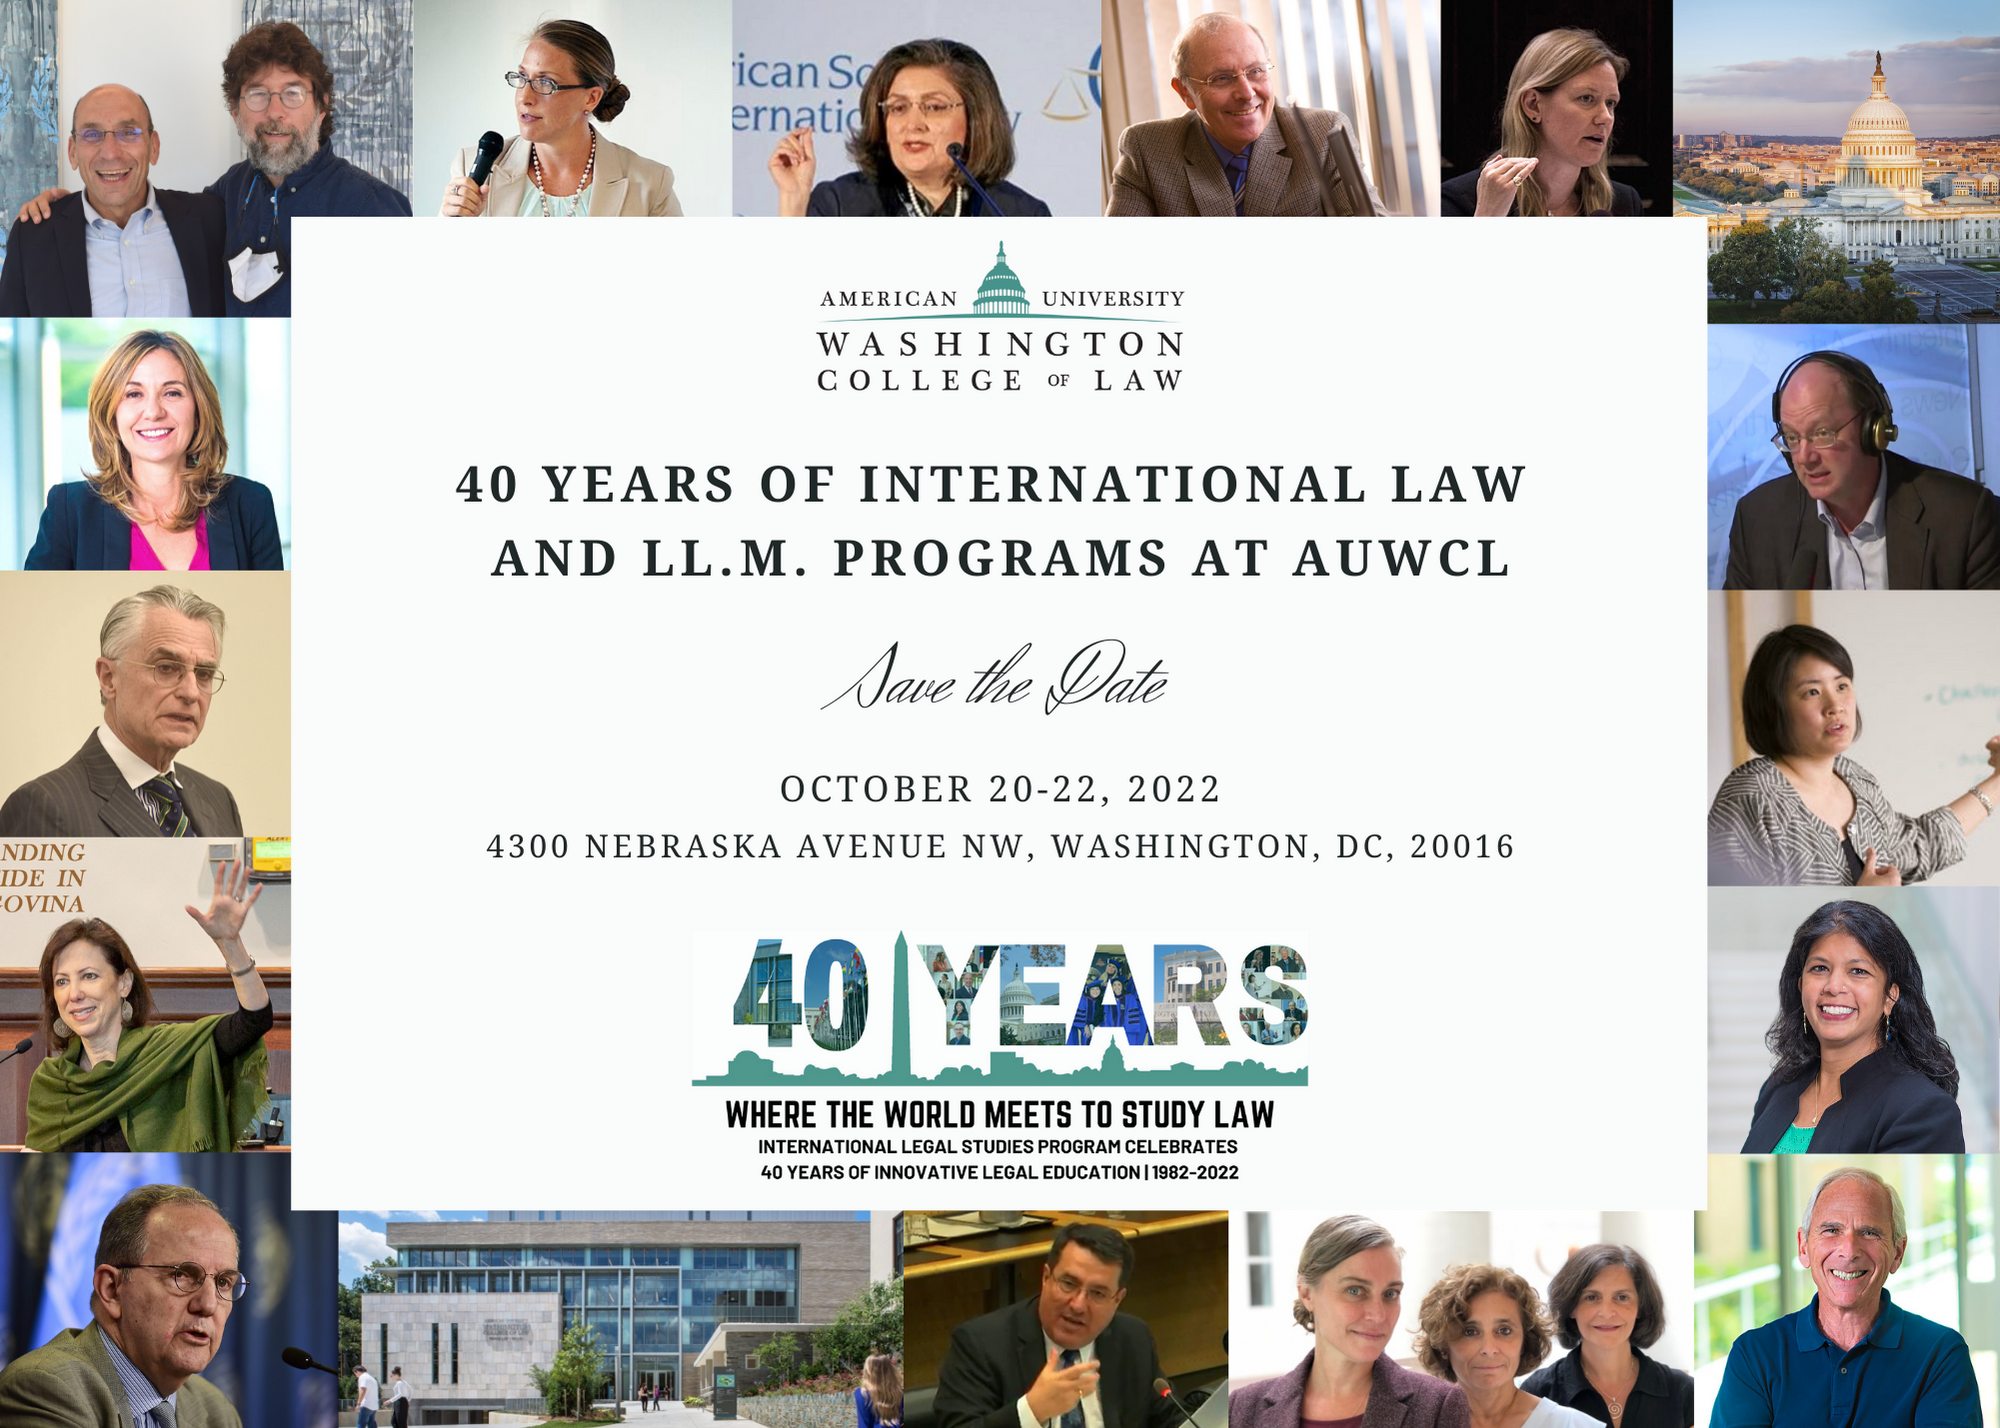 40th Anniversary of International Law at American University Washington College of Law